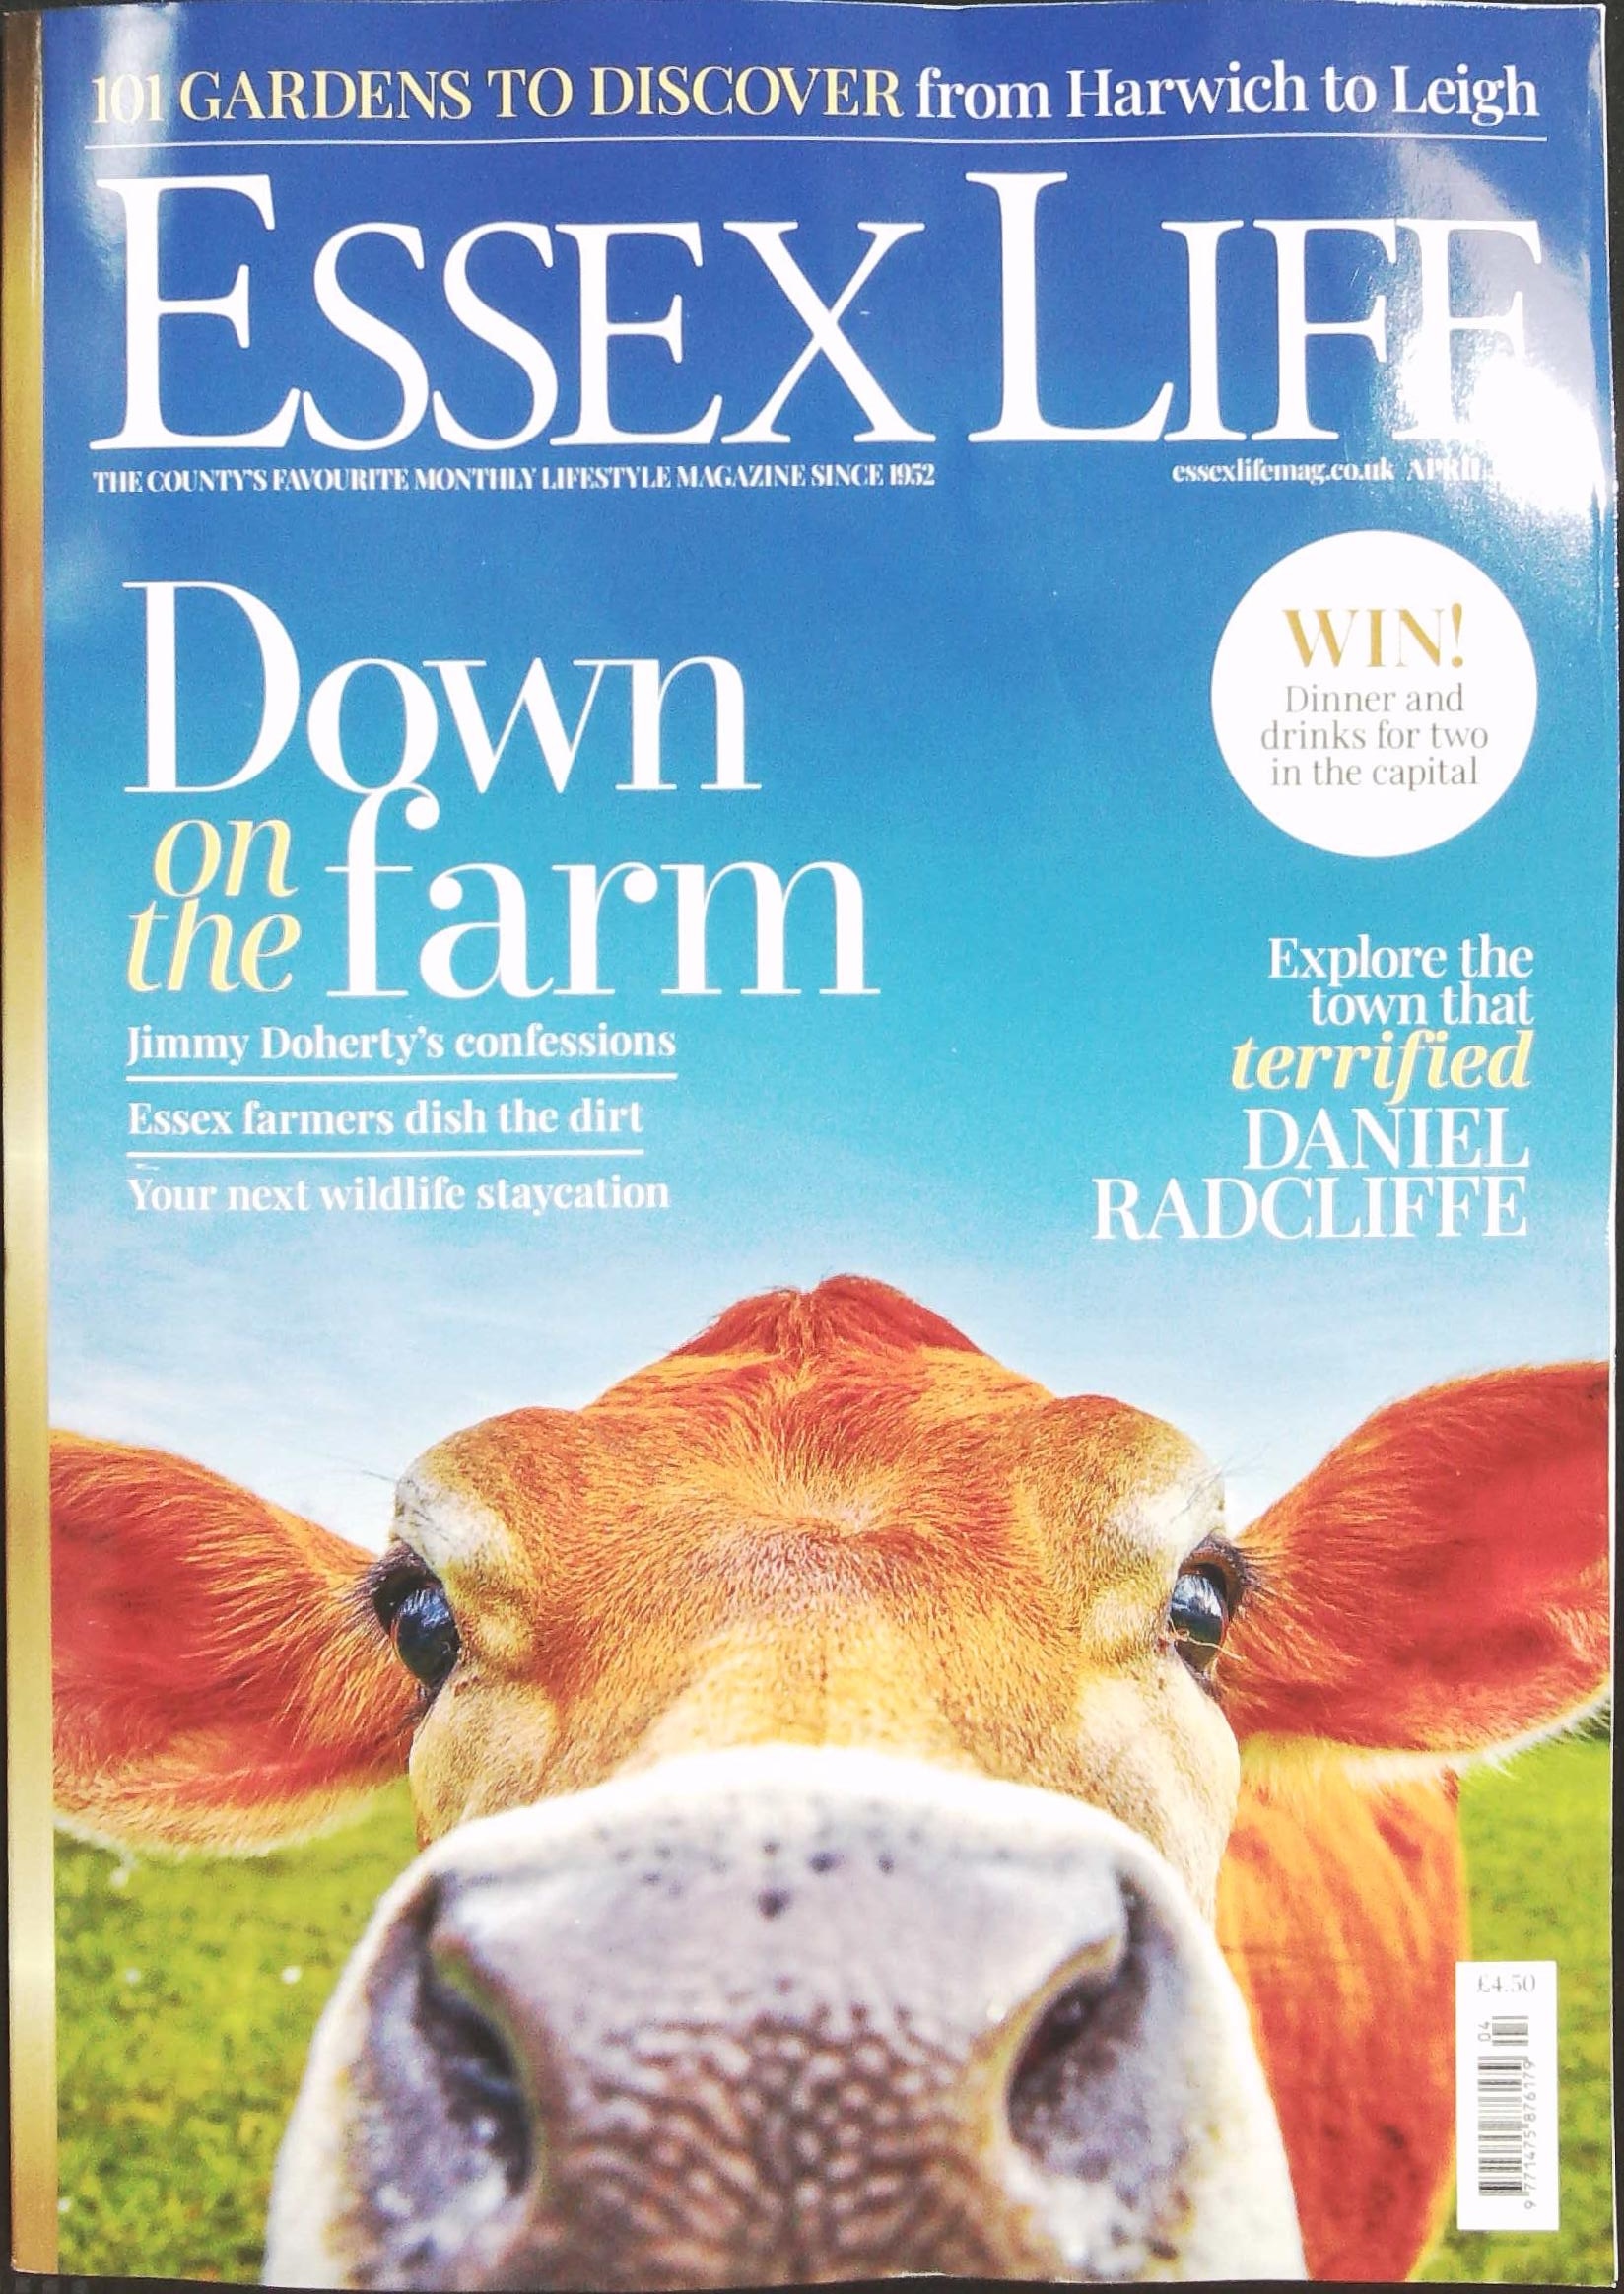 ESSEX LIFE AND COUNTRYSIDE